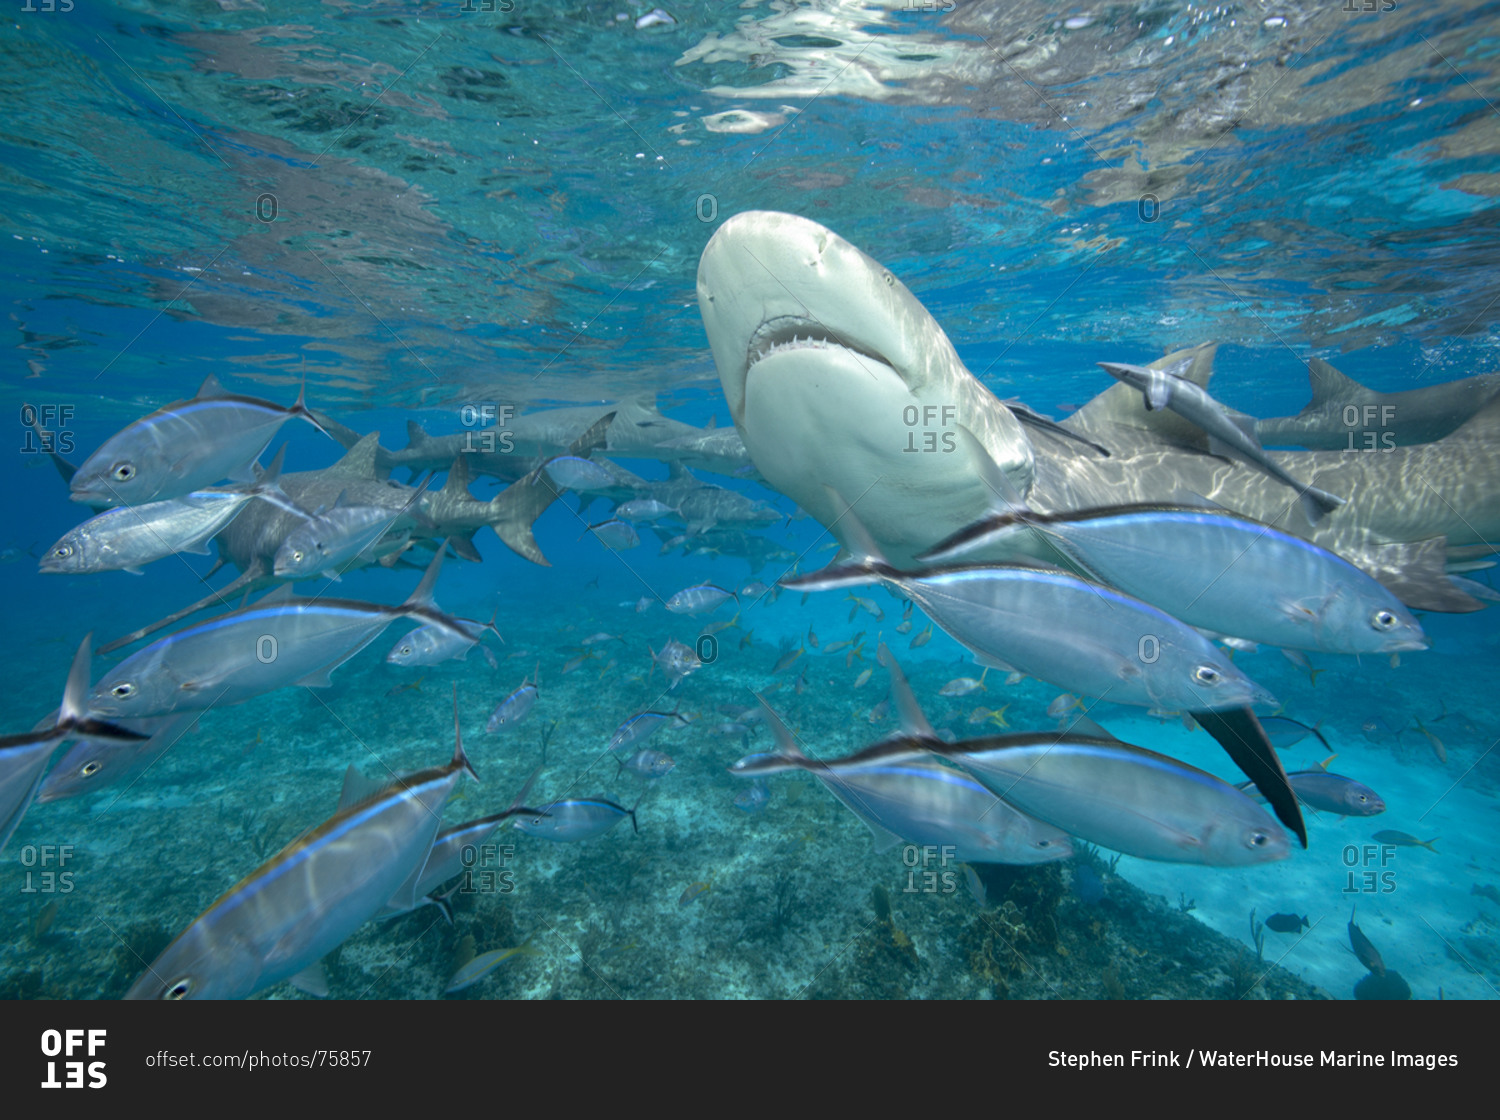 Shark feeding dive draws both Lemon sharks and schooling fish in search of an easy meal